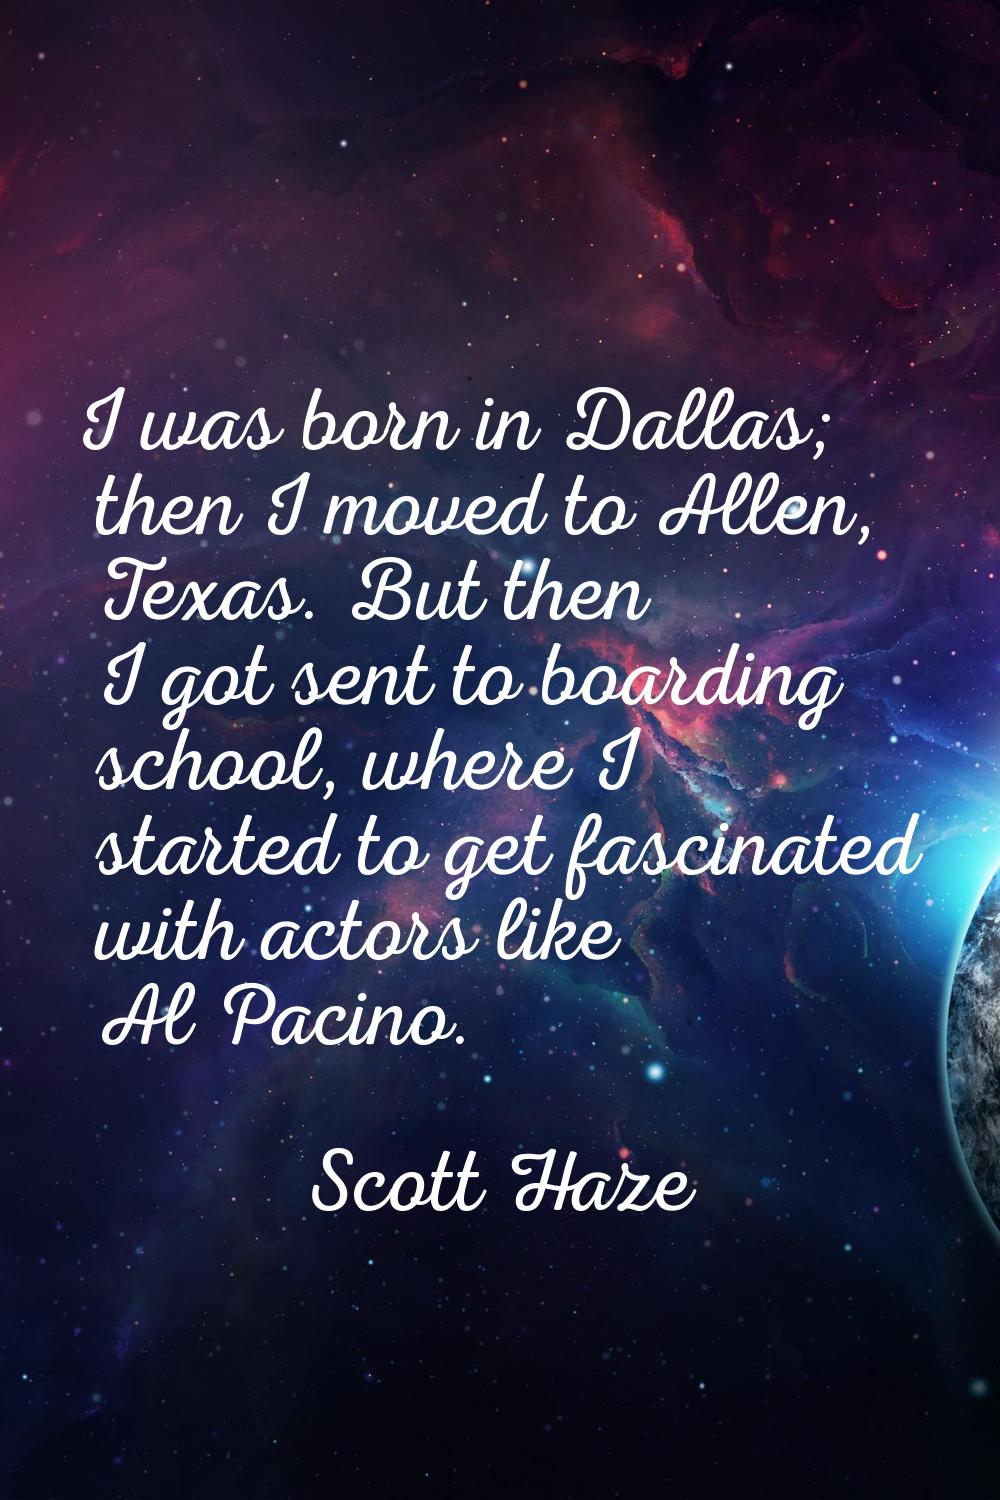 I was born in Dallas; then I moved to Allen, Texas. But then I got sent to boarding school, where I